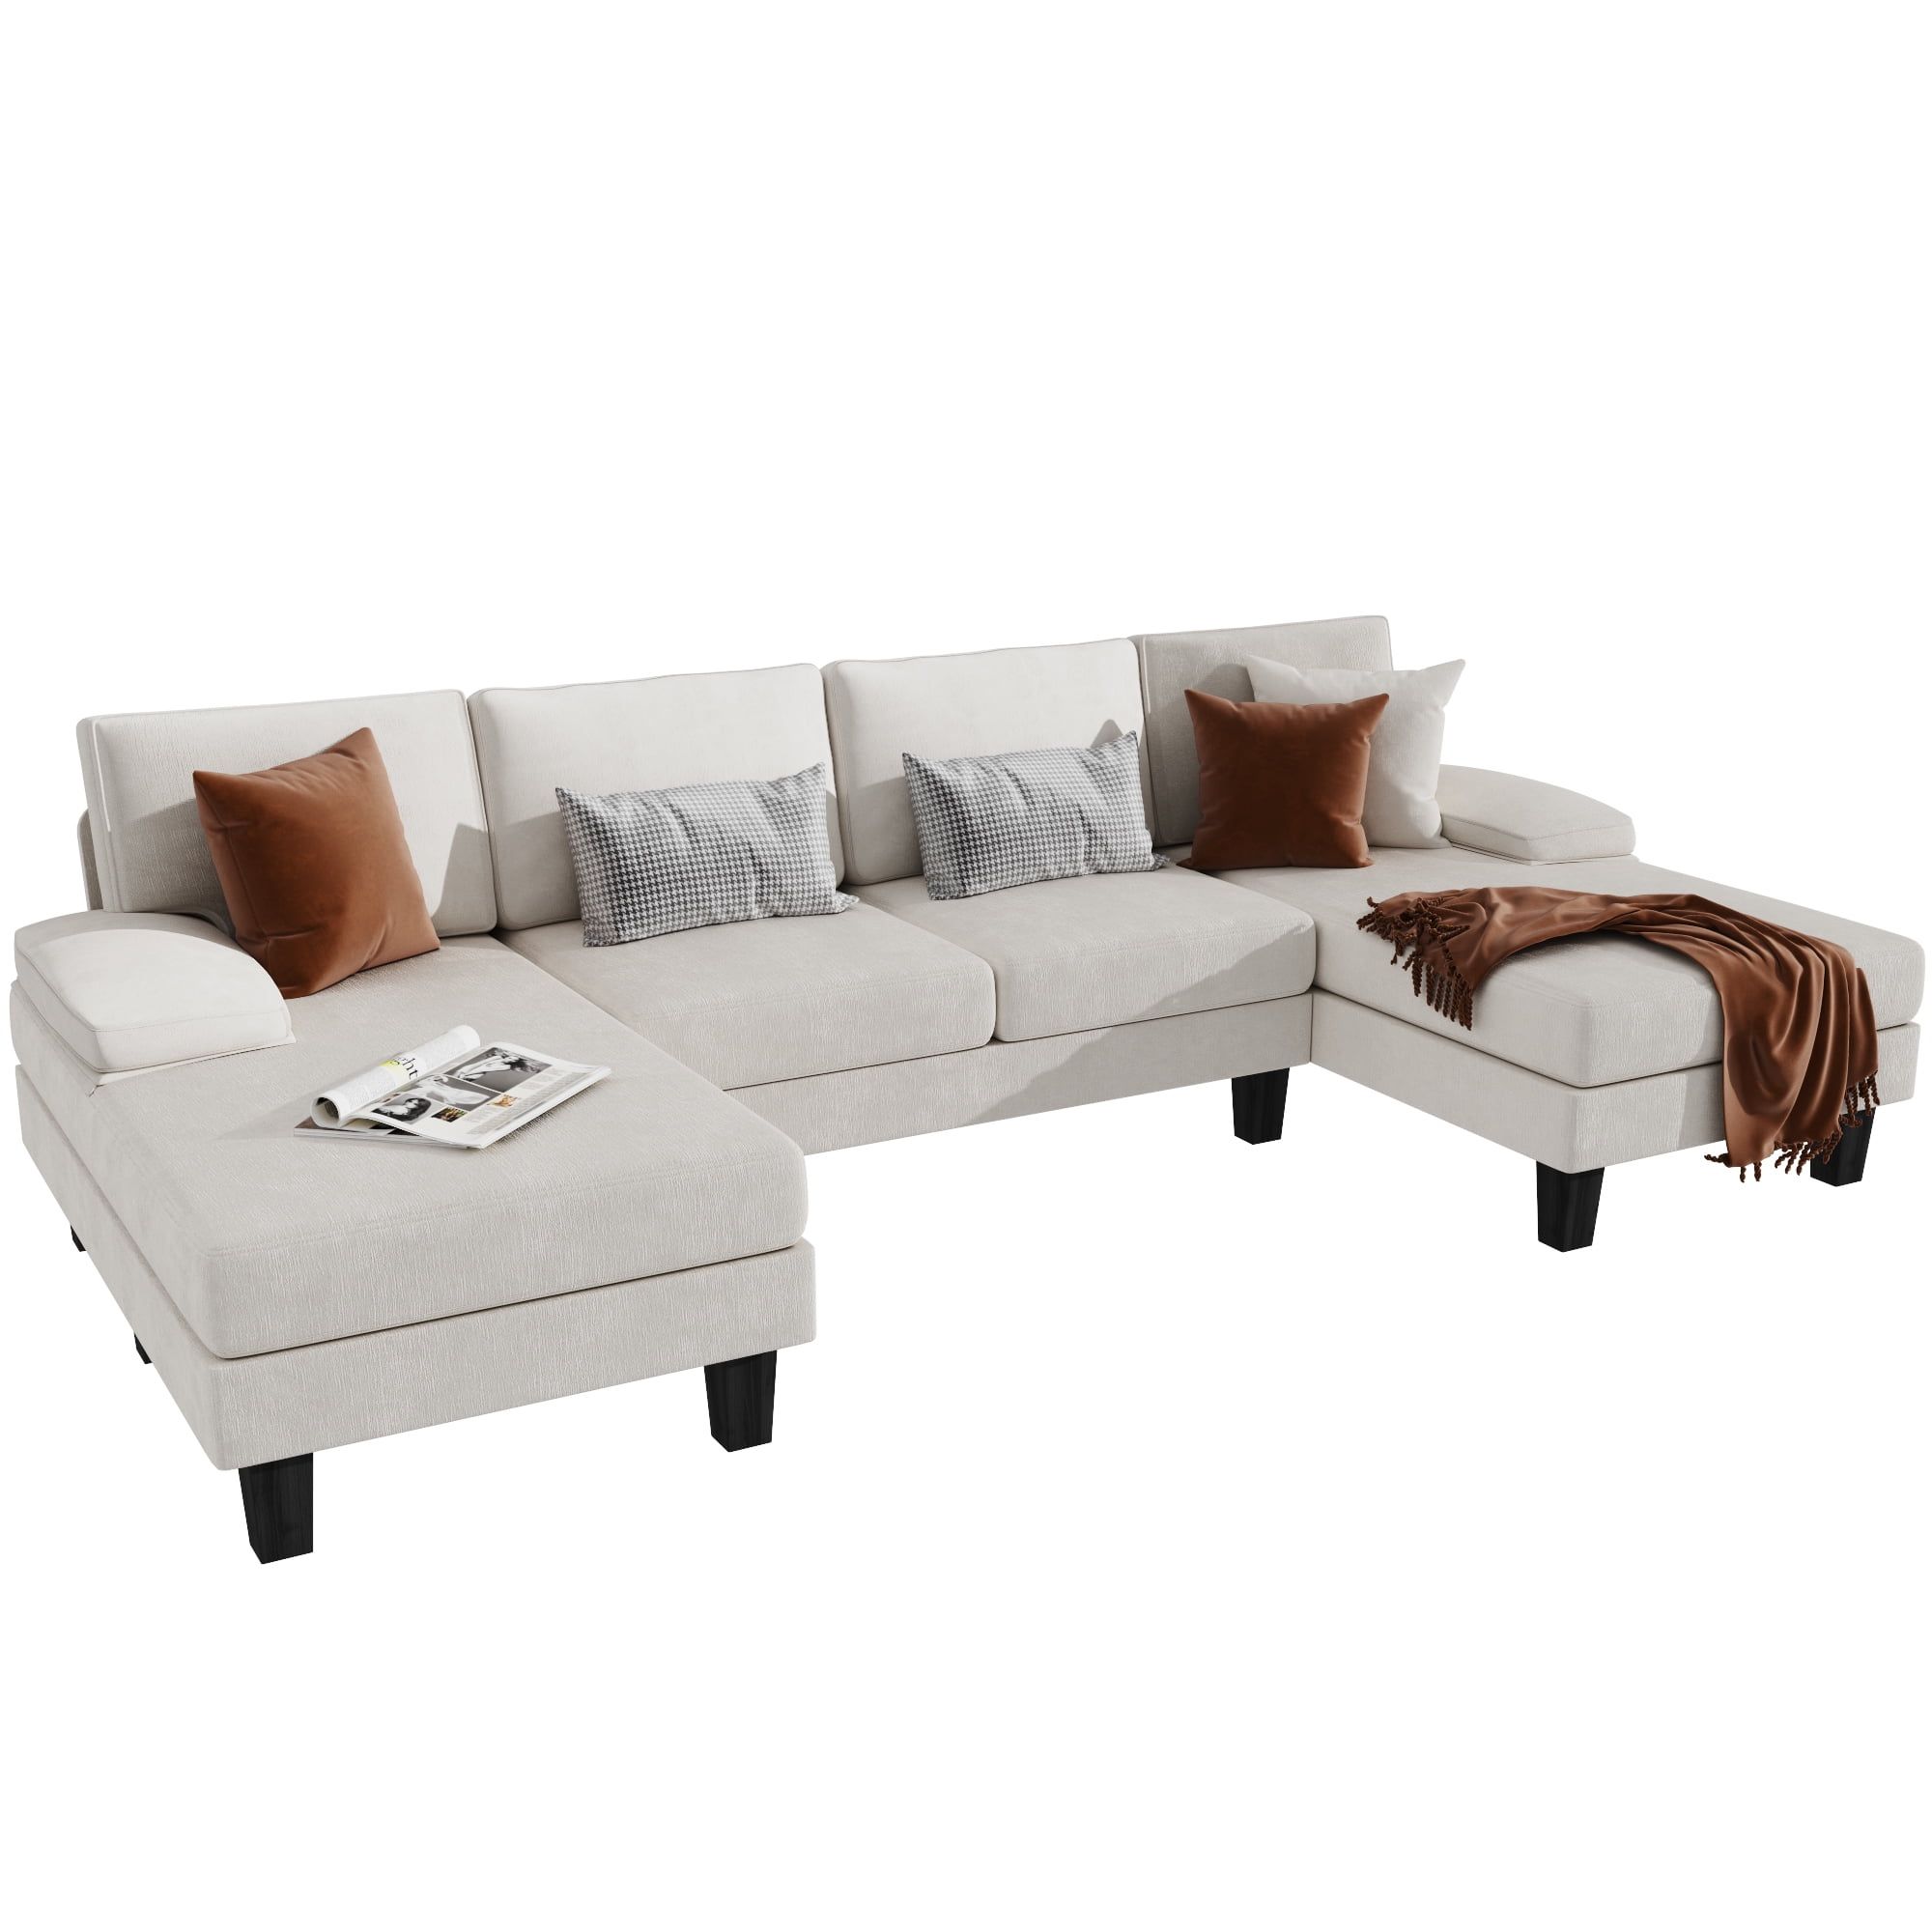 Homall Modern U Shape Sectional Sofa, Chenille Fabric Modular Couch, 4 Regarding 110" Oversized Sofas (View 19 of 20)